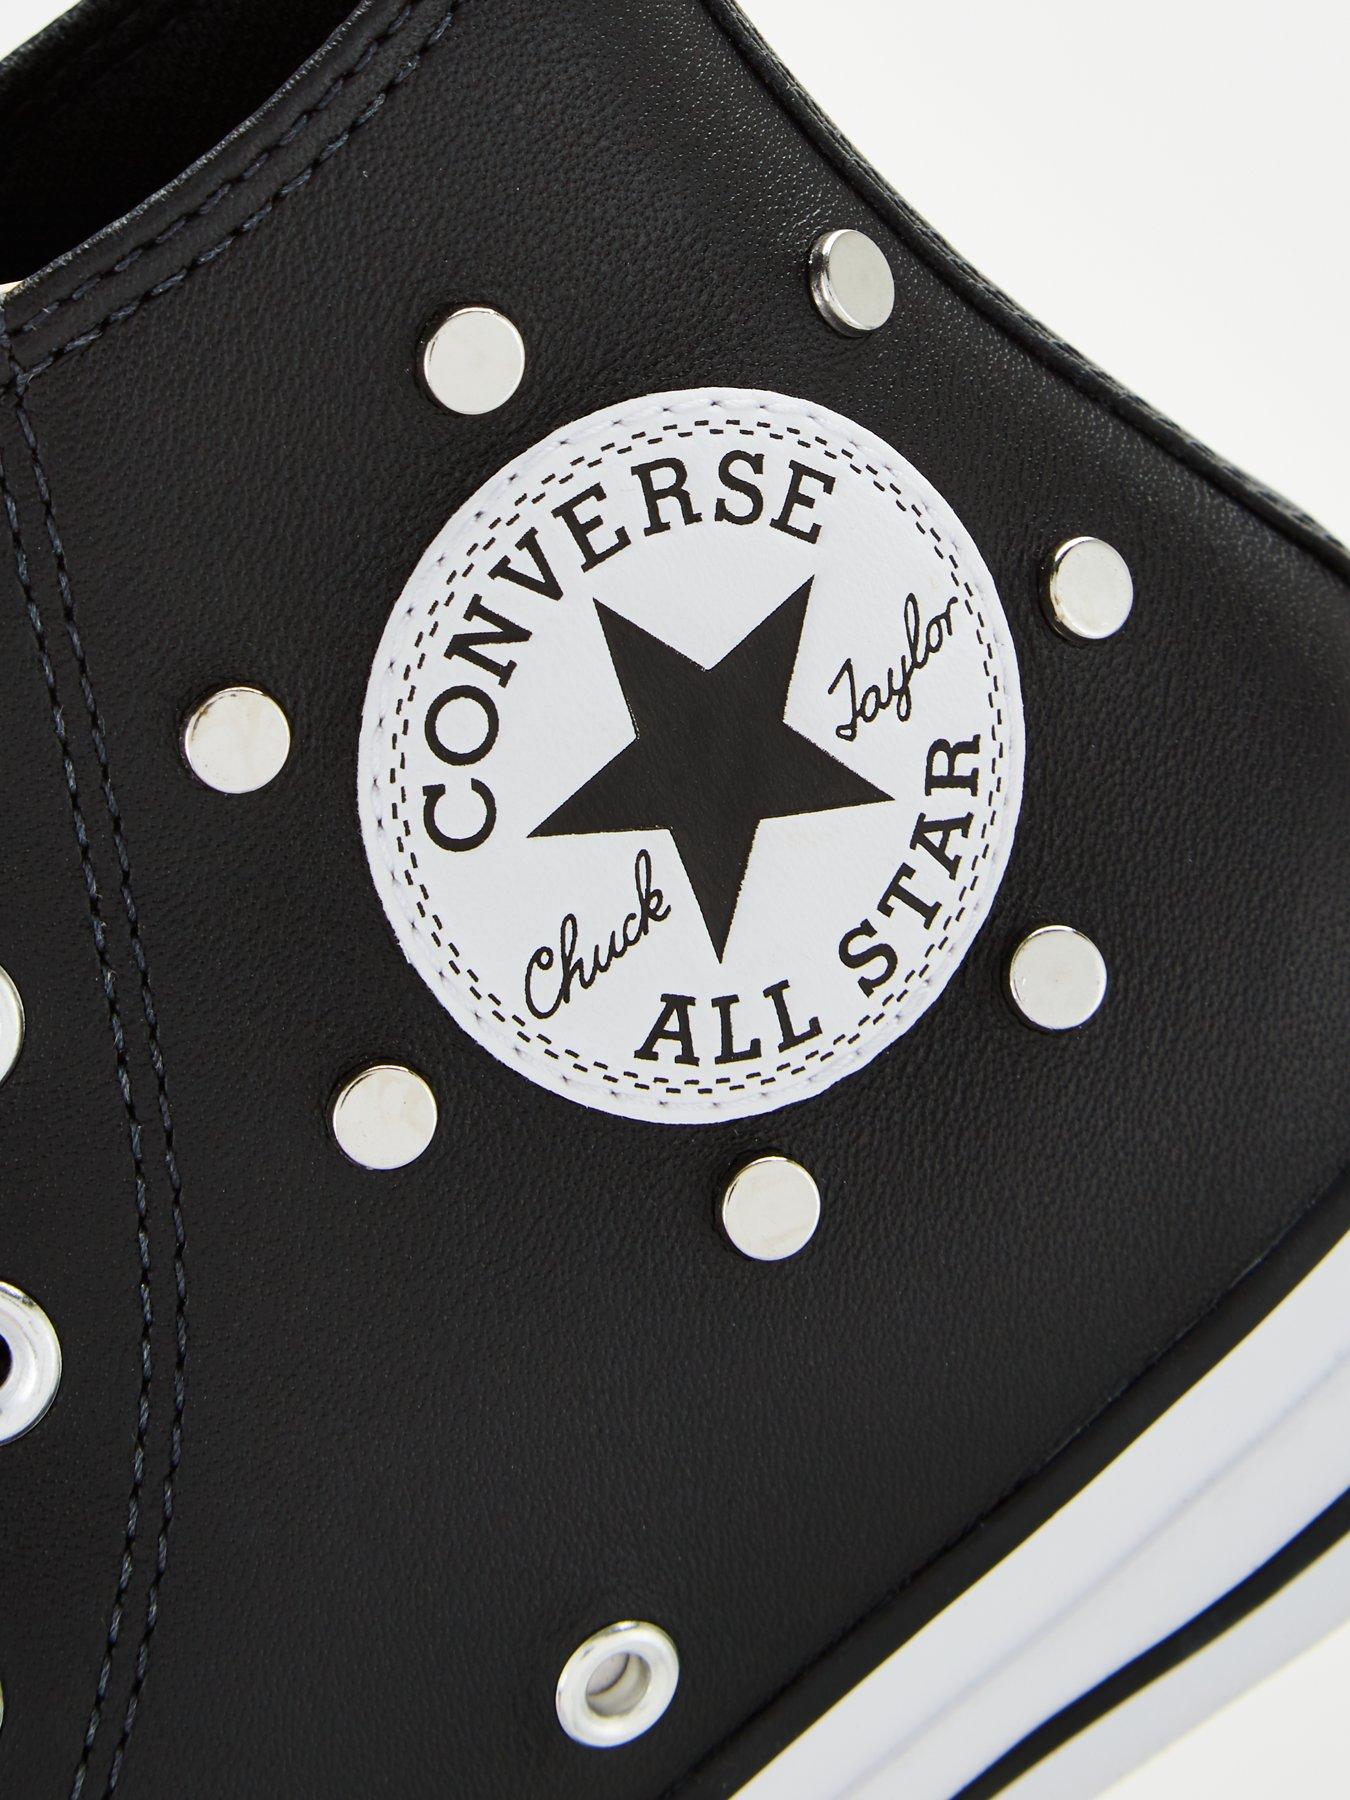 converse leather studded